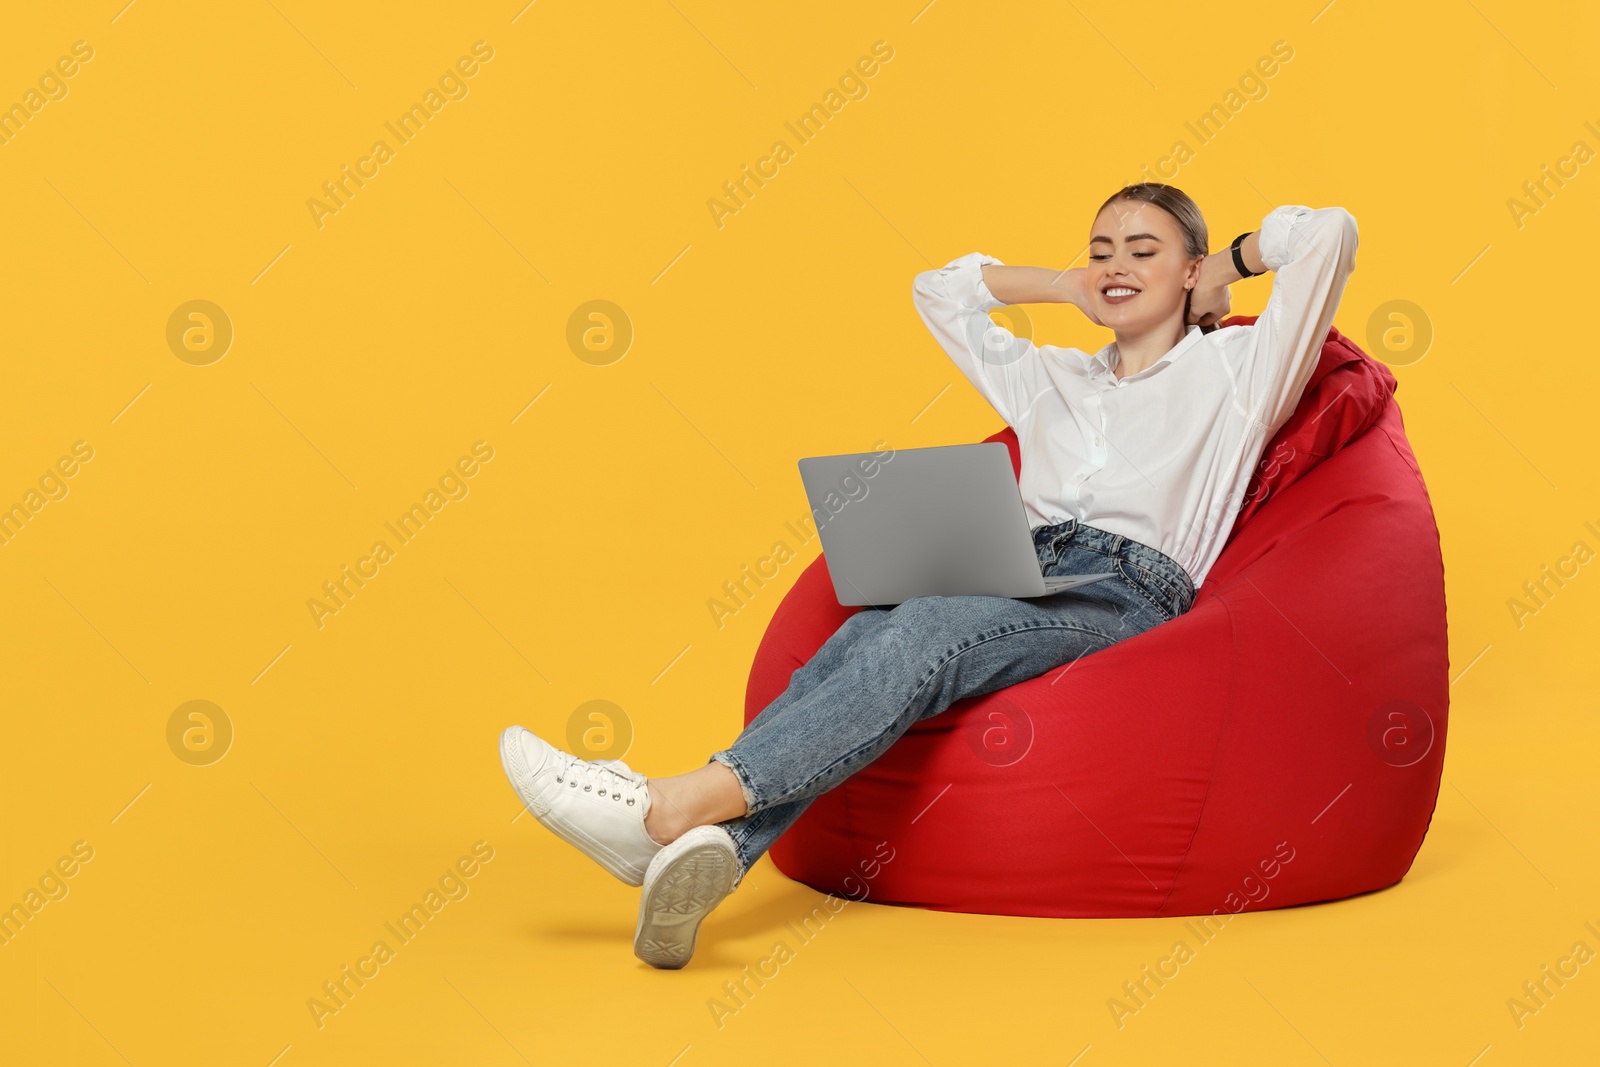 Photo of Happy woman with laptop sitting on beanbag chair against orange background. Space for text